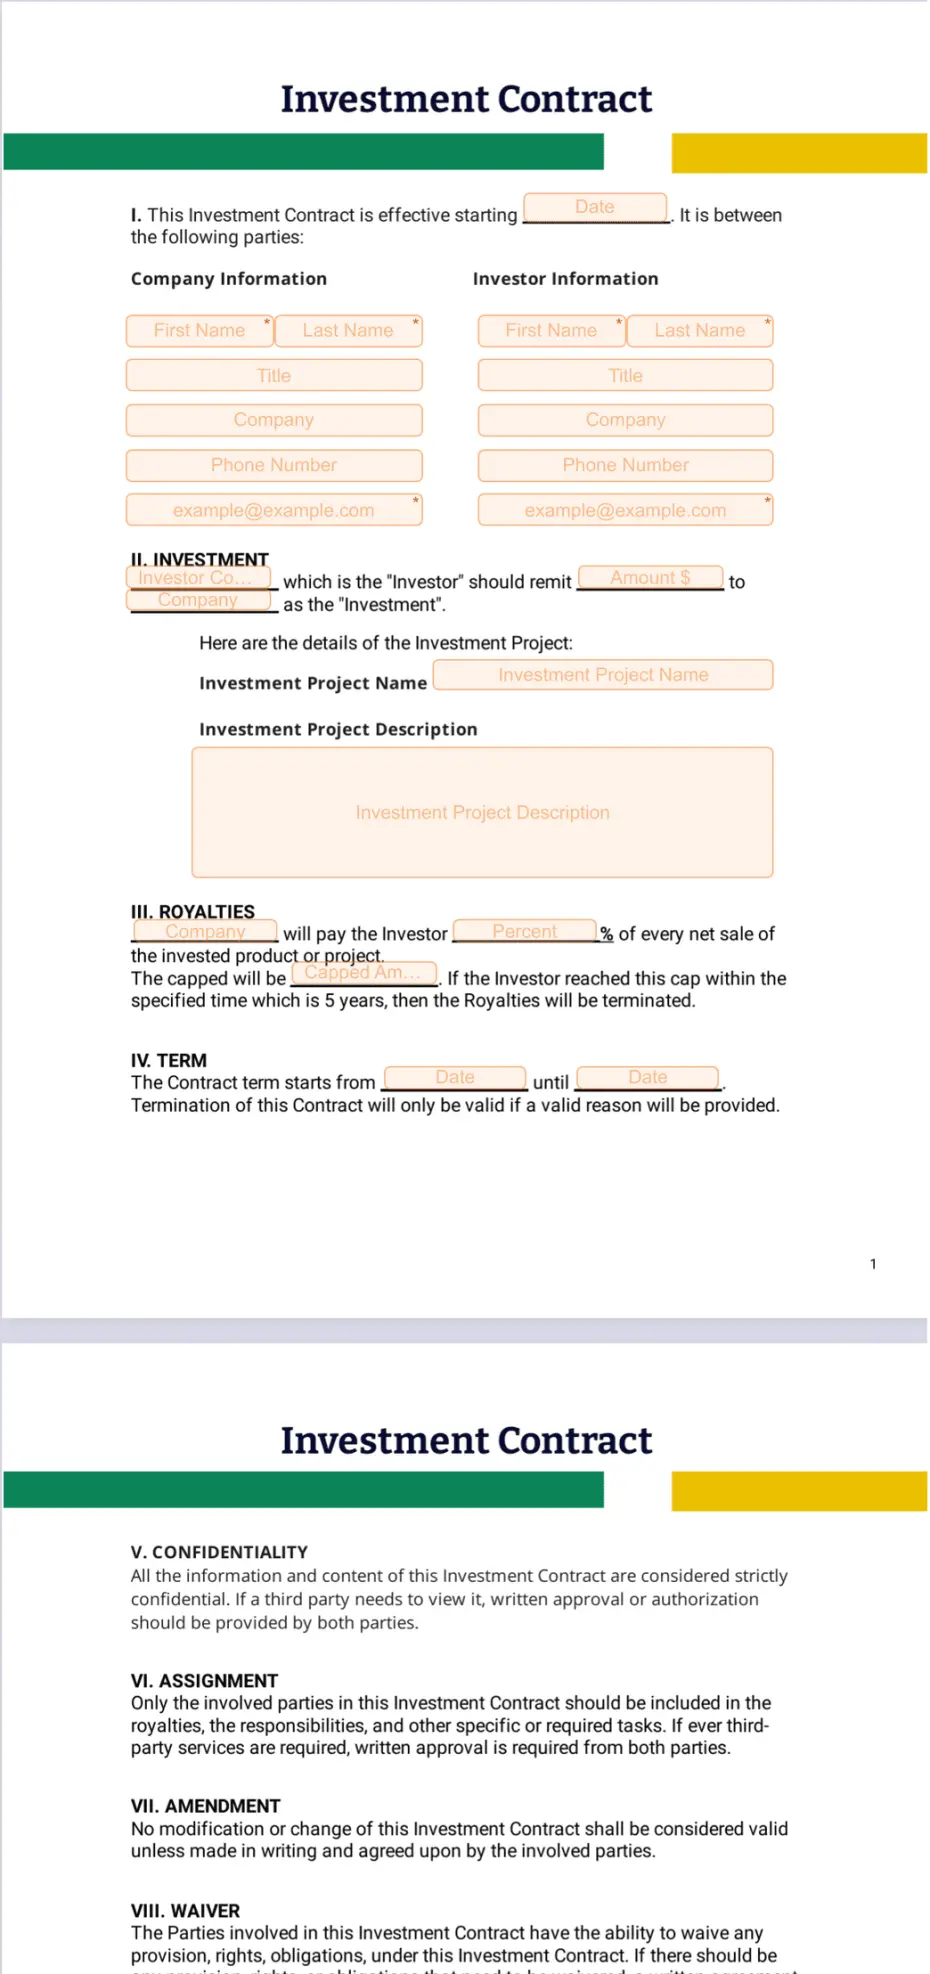 Investment Contract